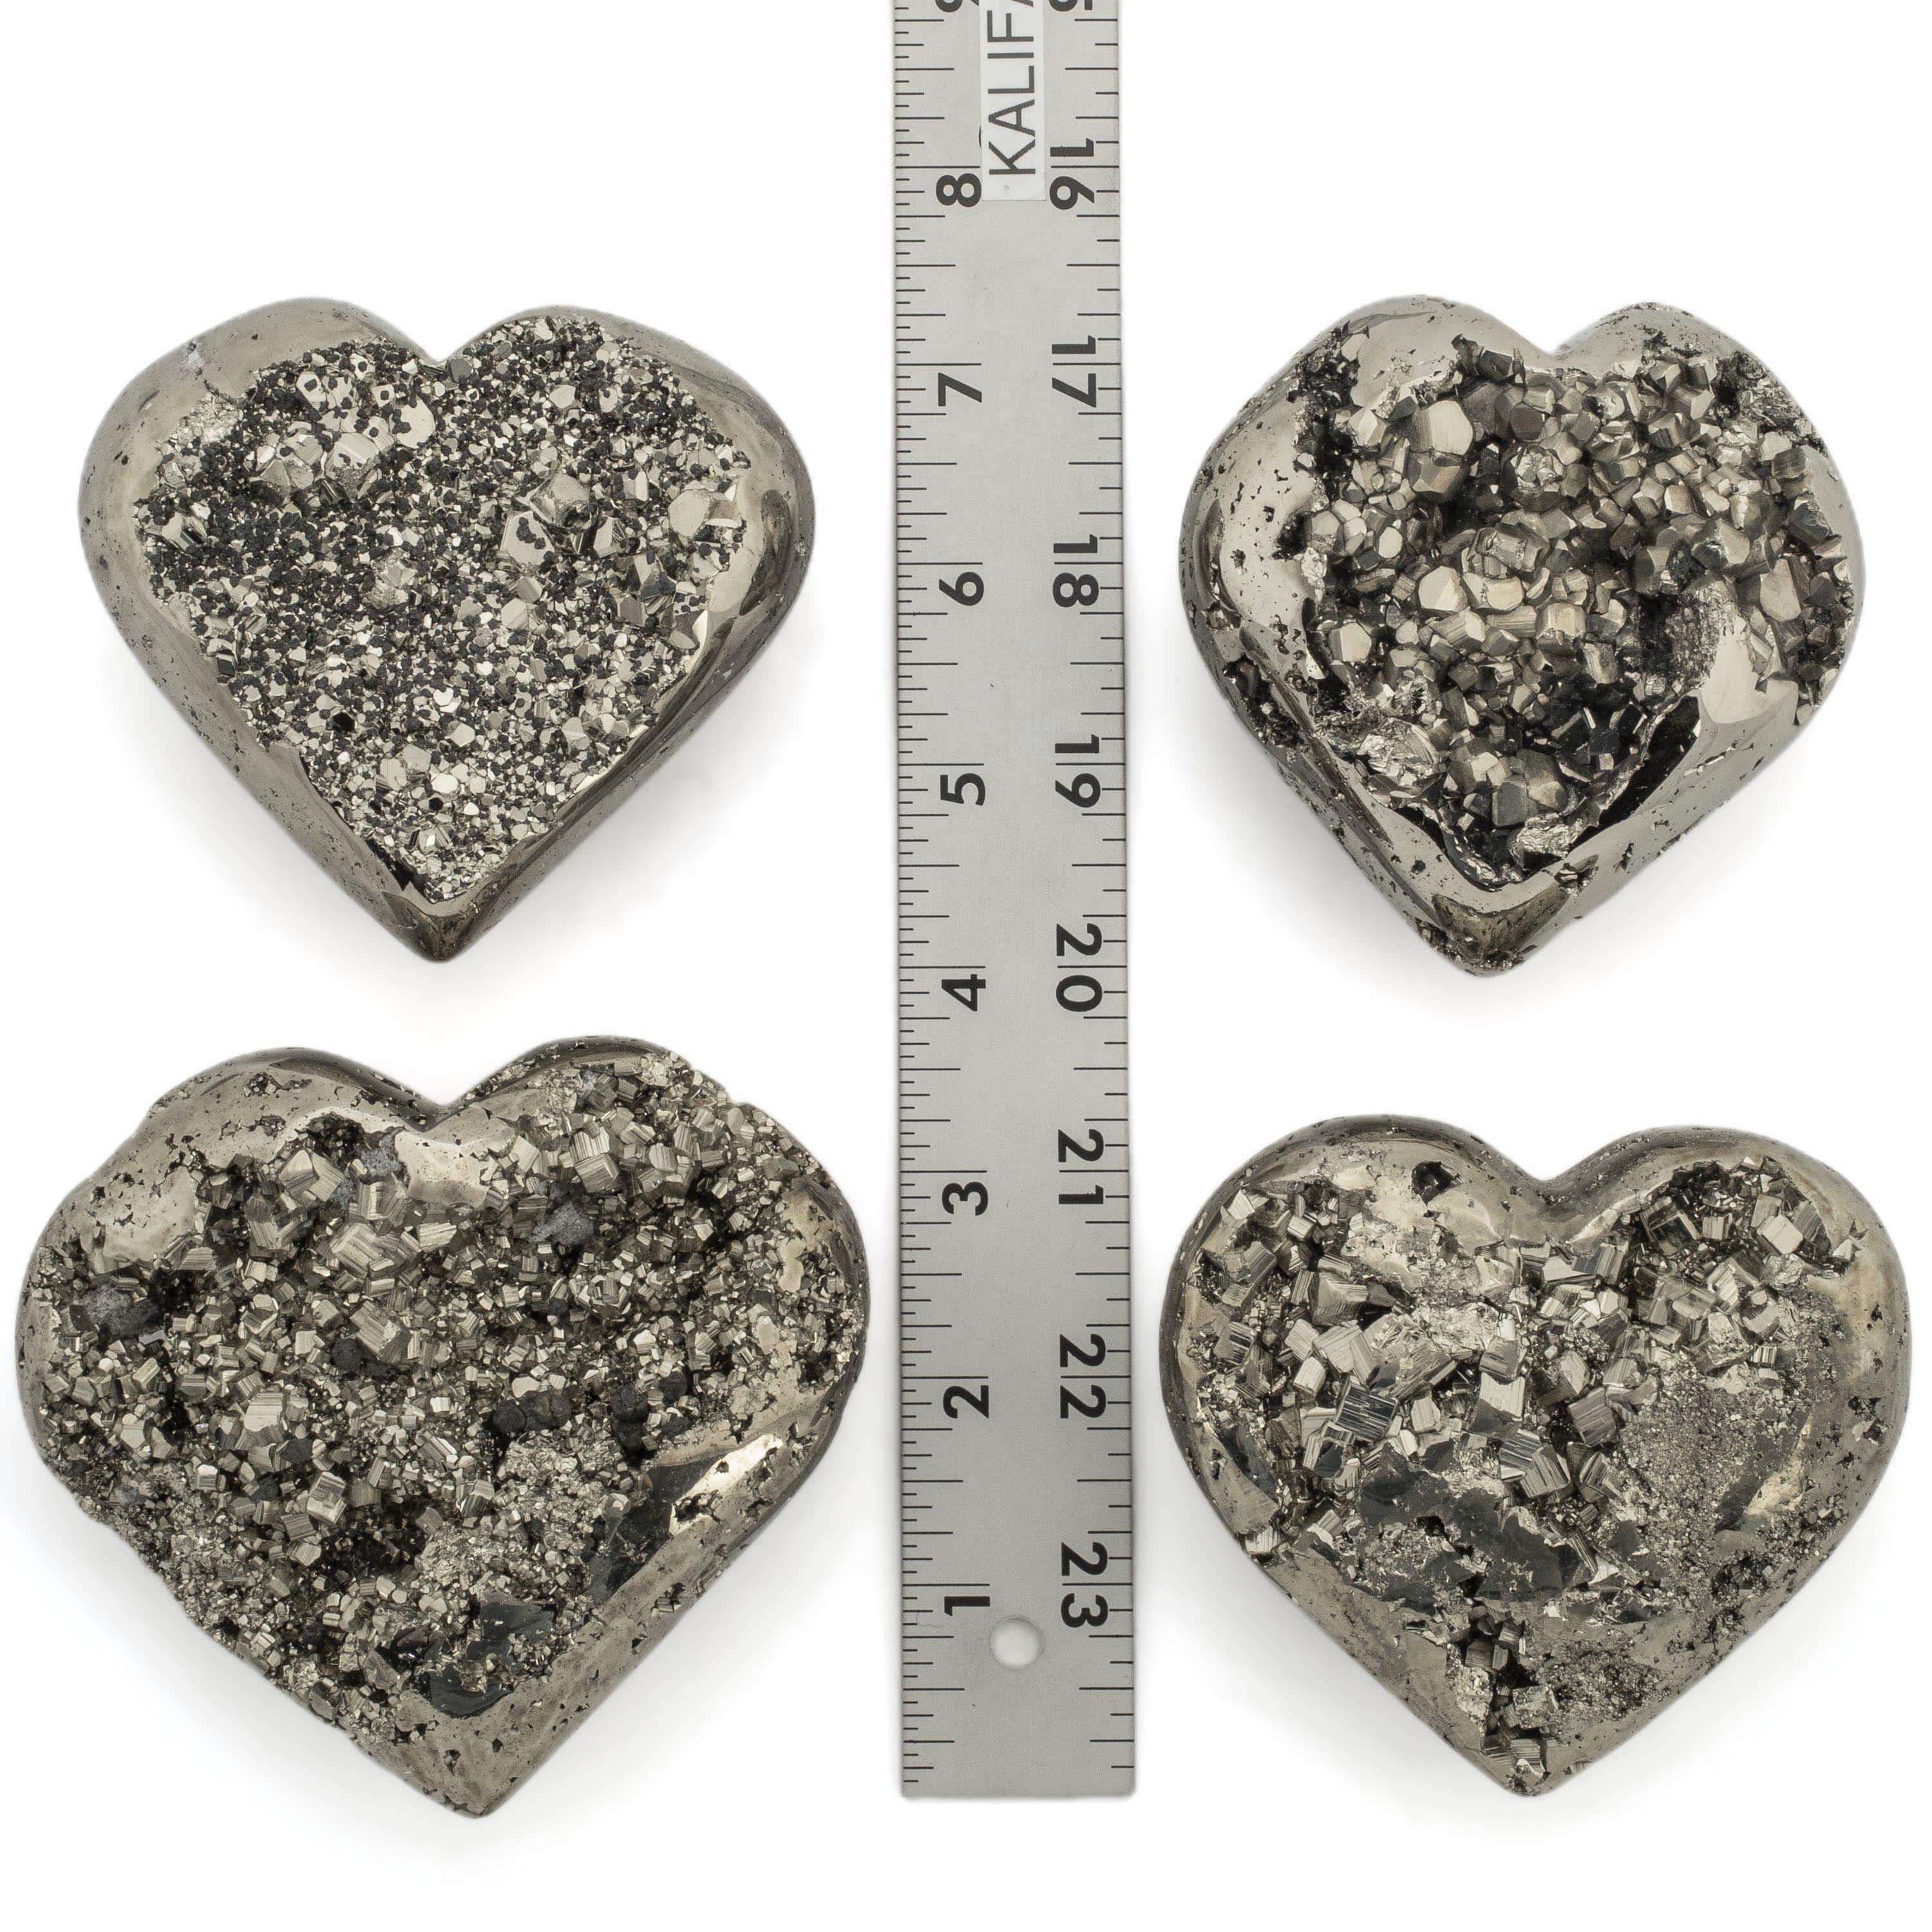 Kalifano Pyrite Pyrite Heart Carving 4" / 550g GH600-PC